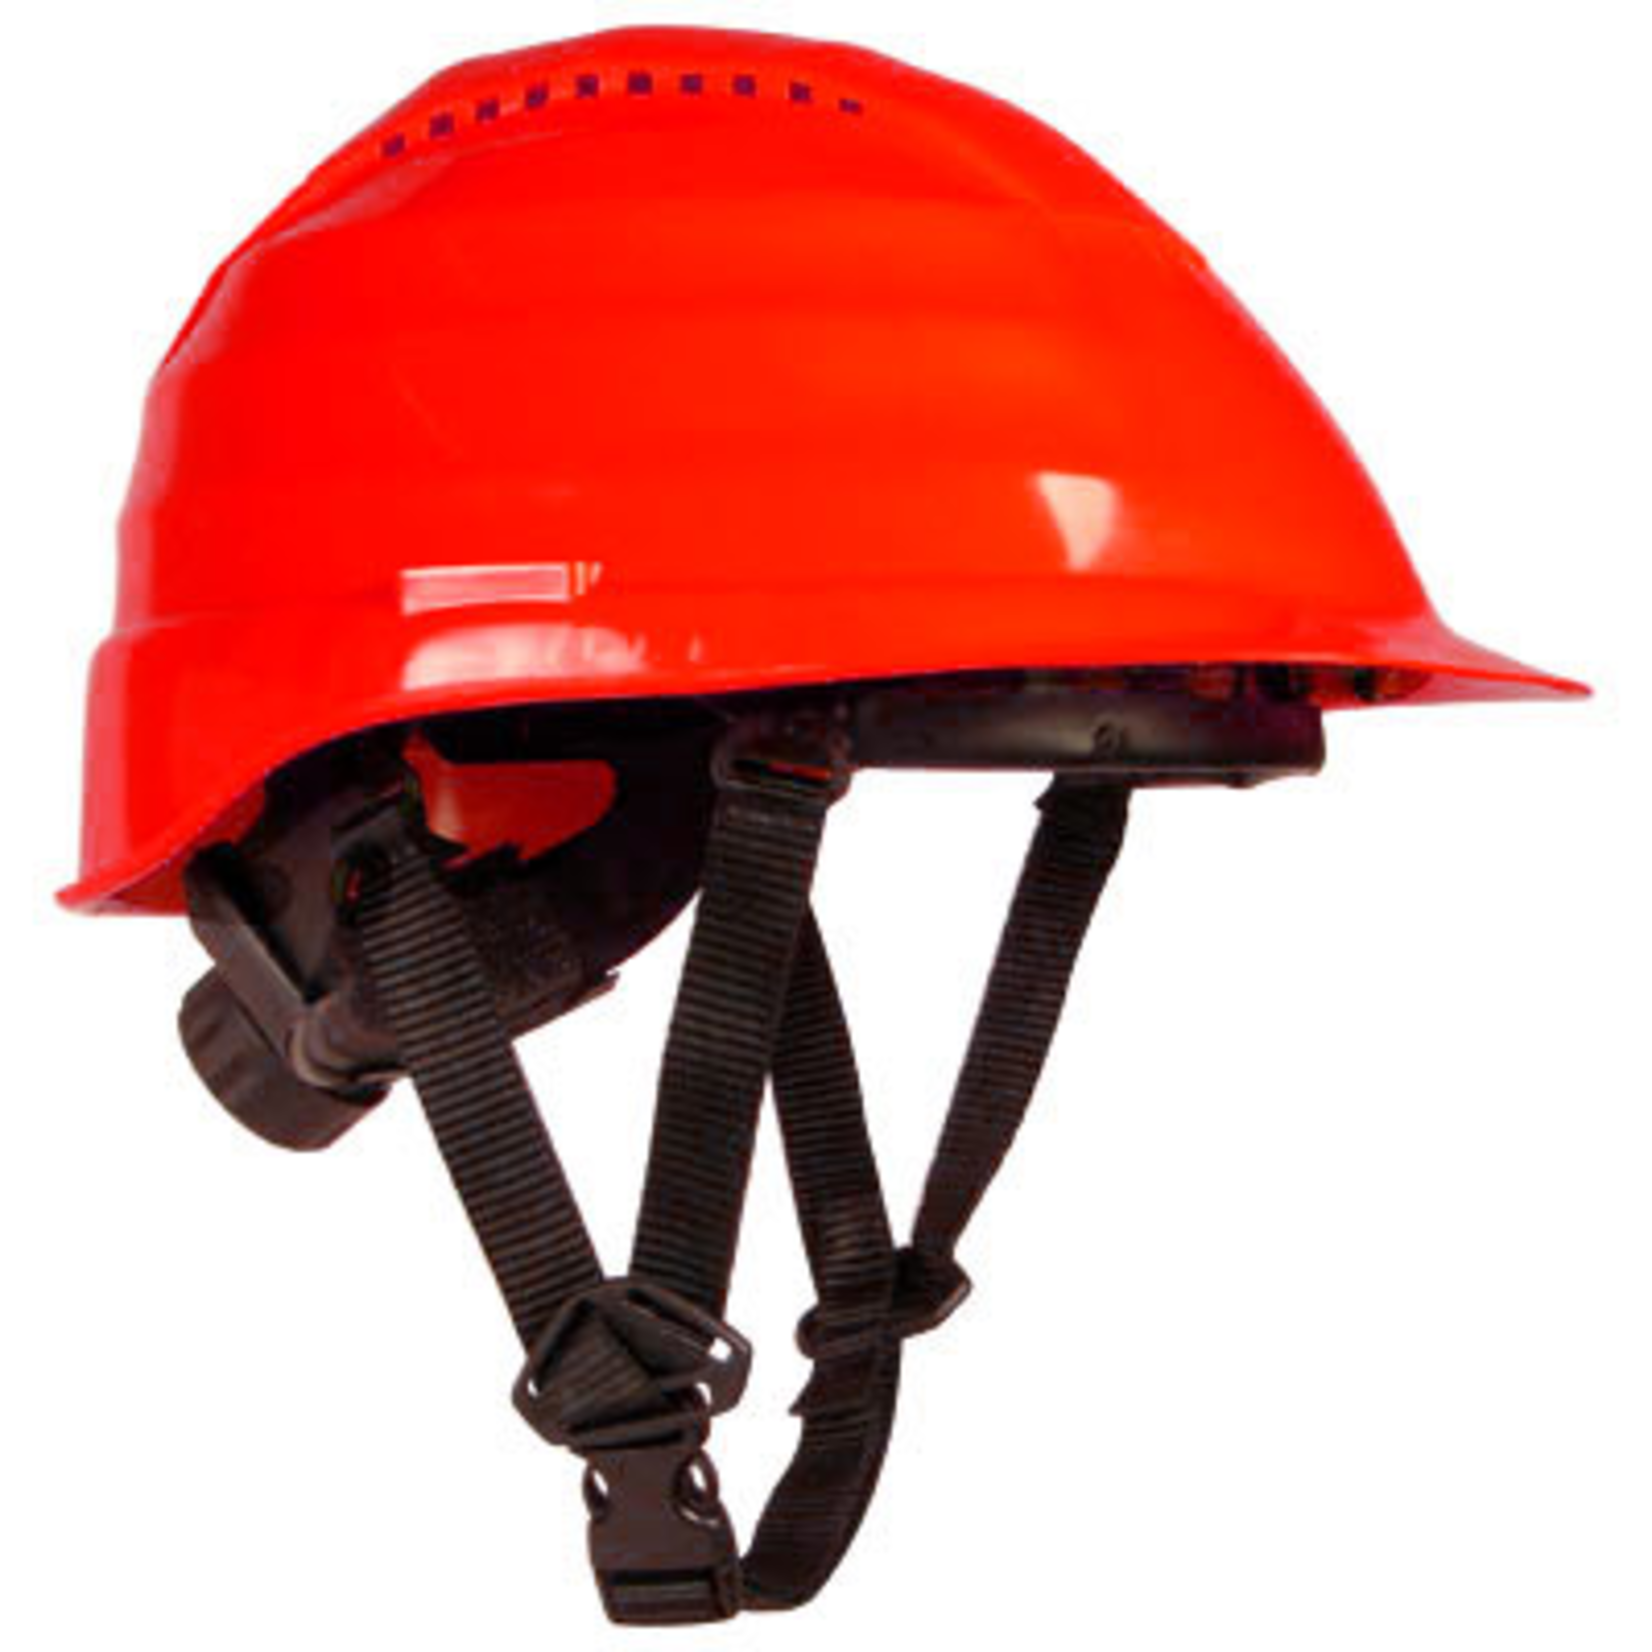 Rockman Rockman Forestry Arborist Vented Helmet, Red with 4 Point Chinstrap